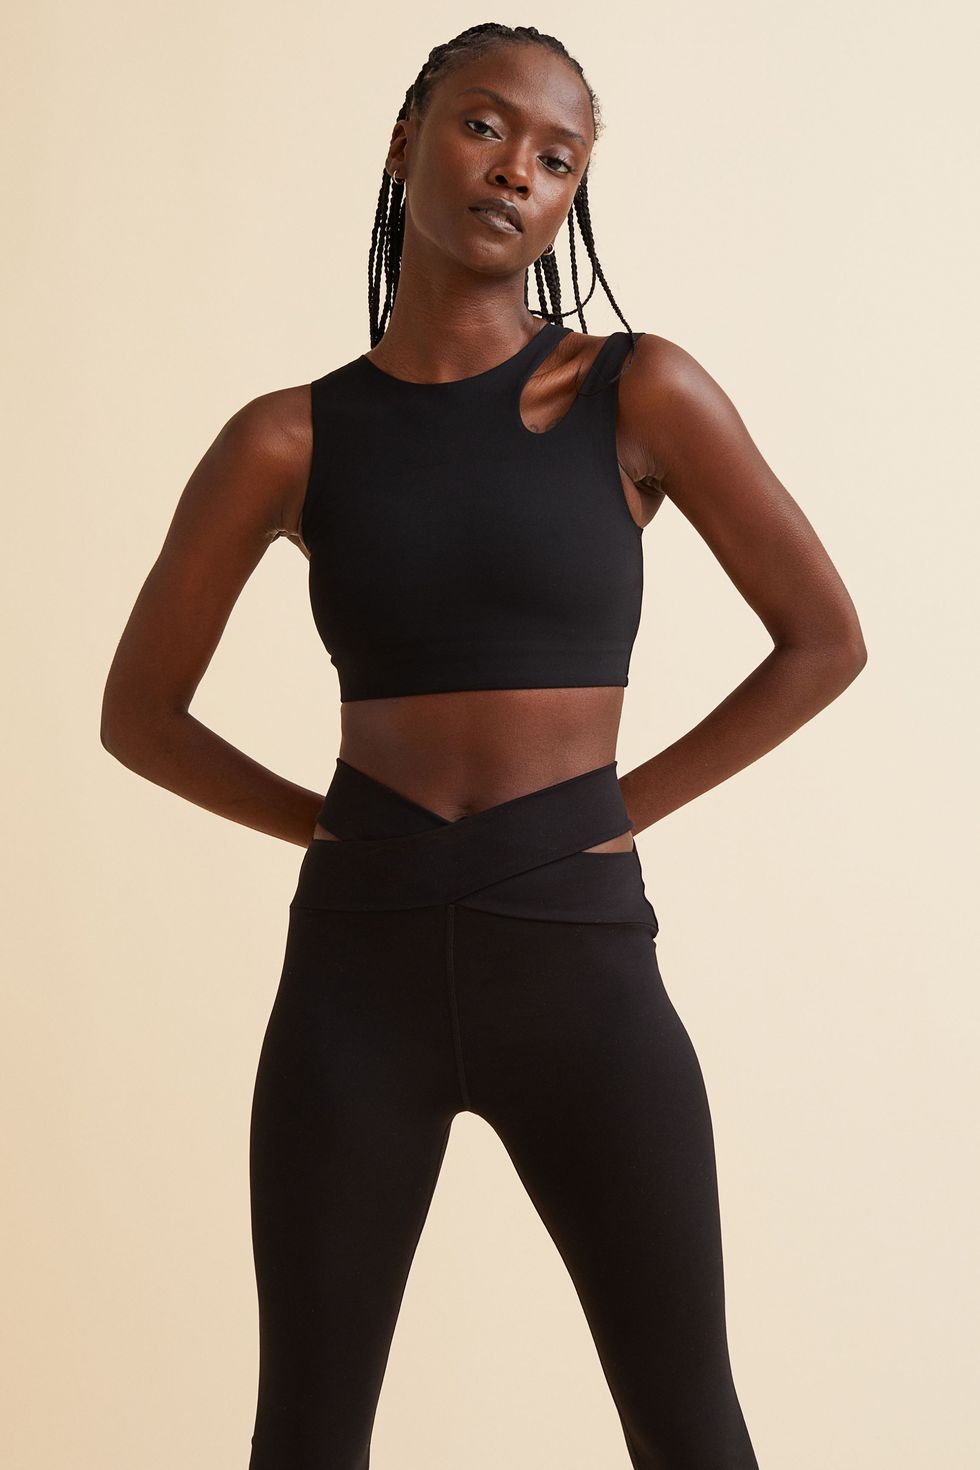 H&M Move: The stylish and functional fitness brand from H&M